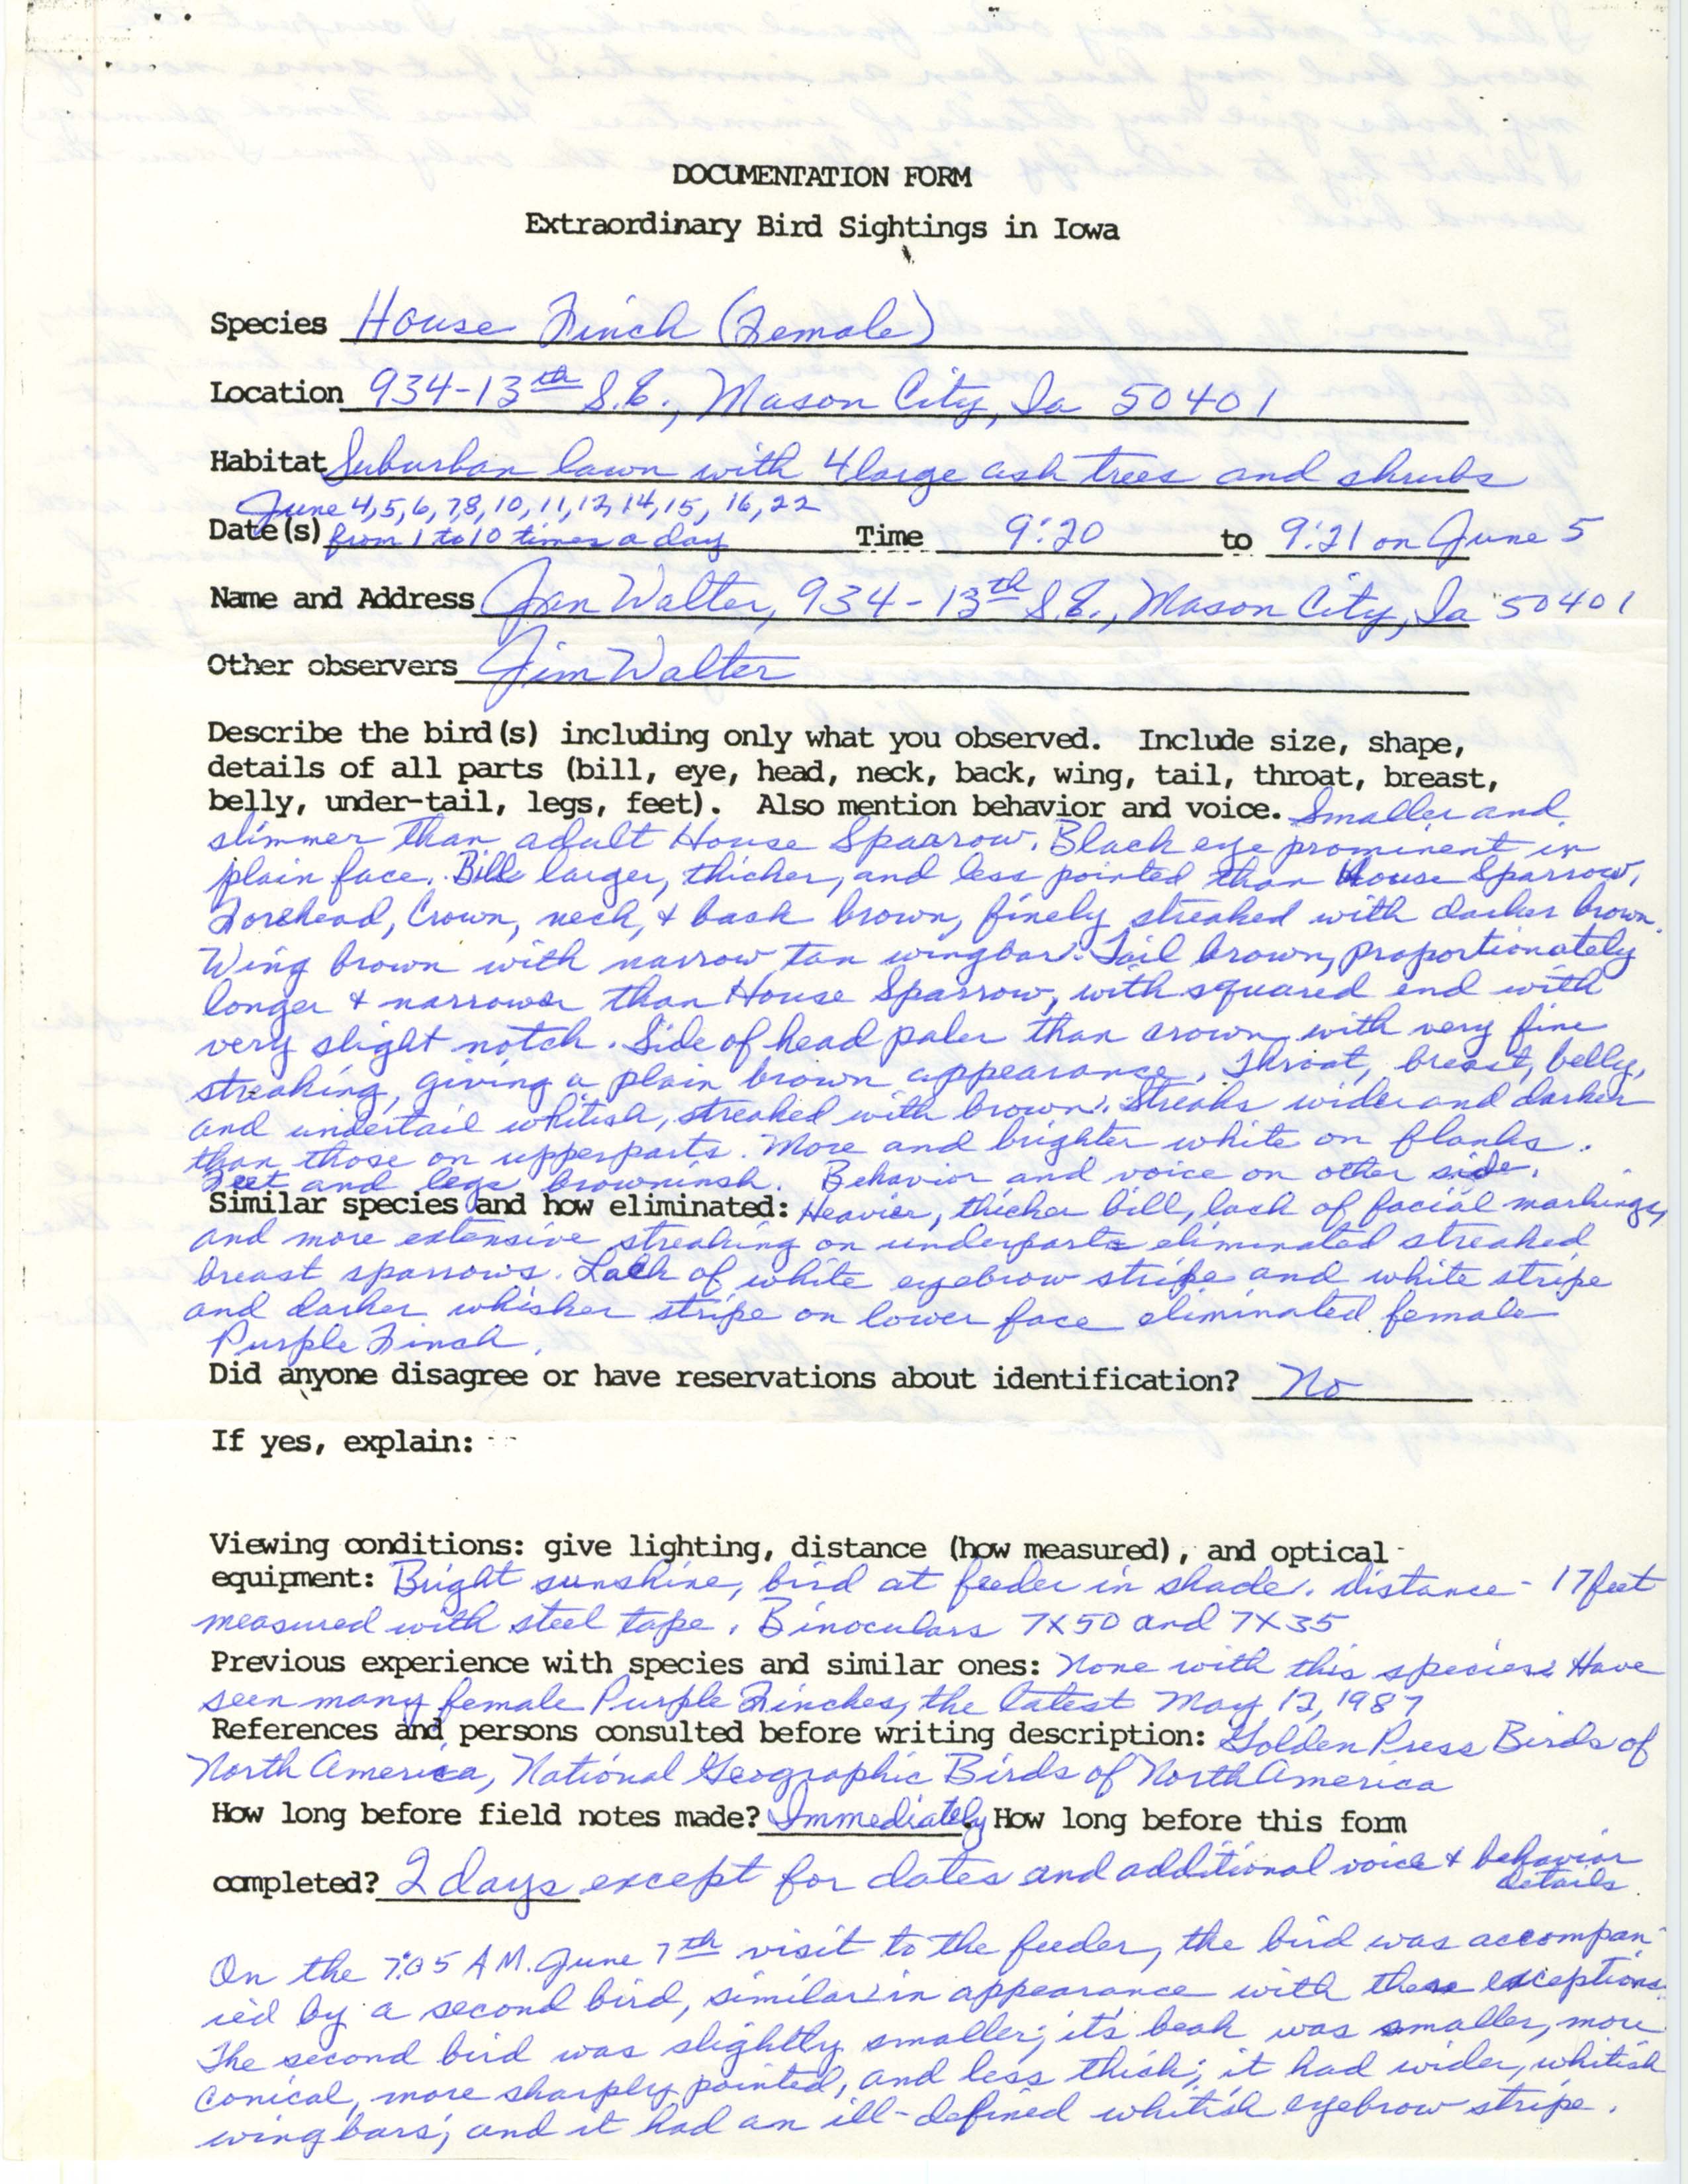 Rare bird documentation form for House Finch at Mason City in 1987